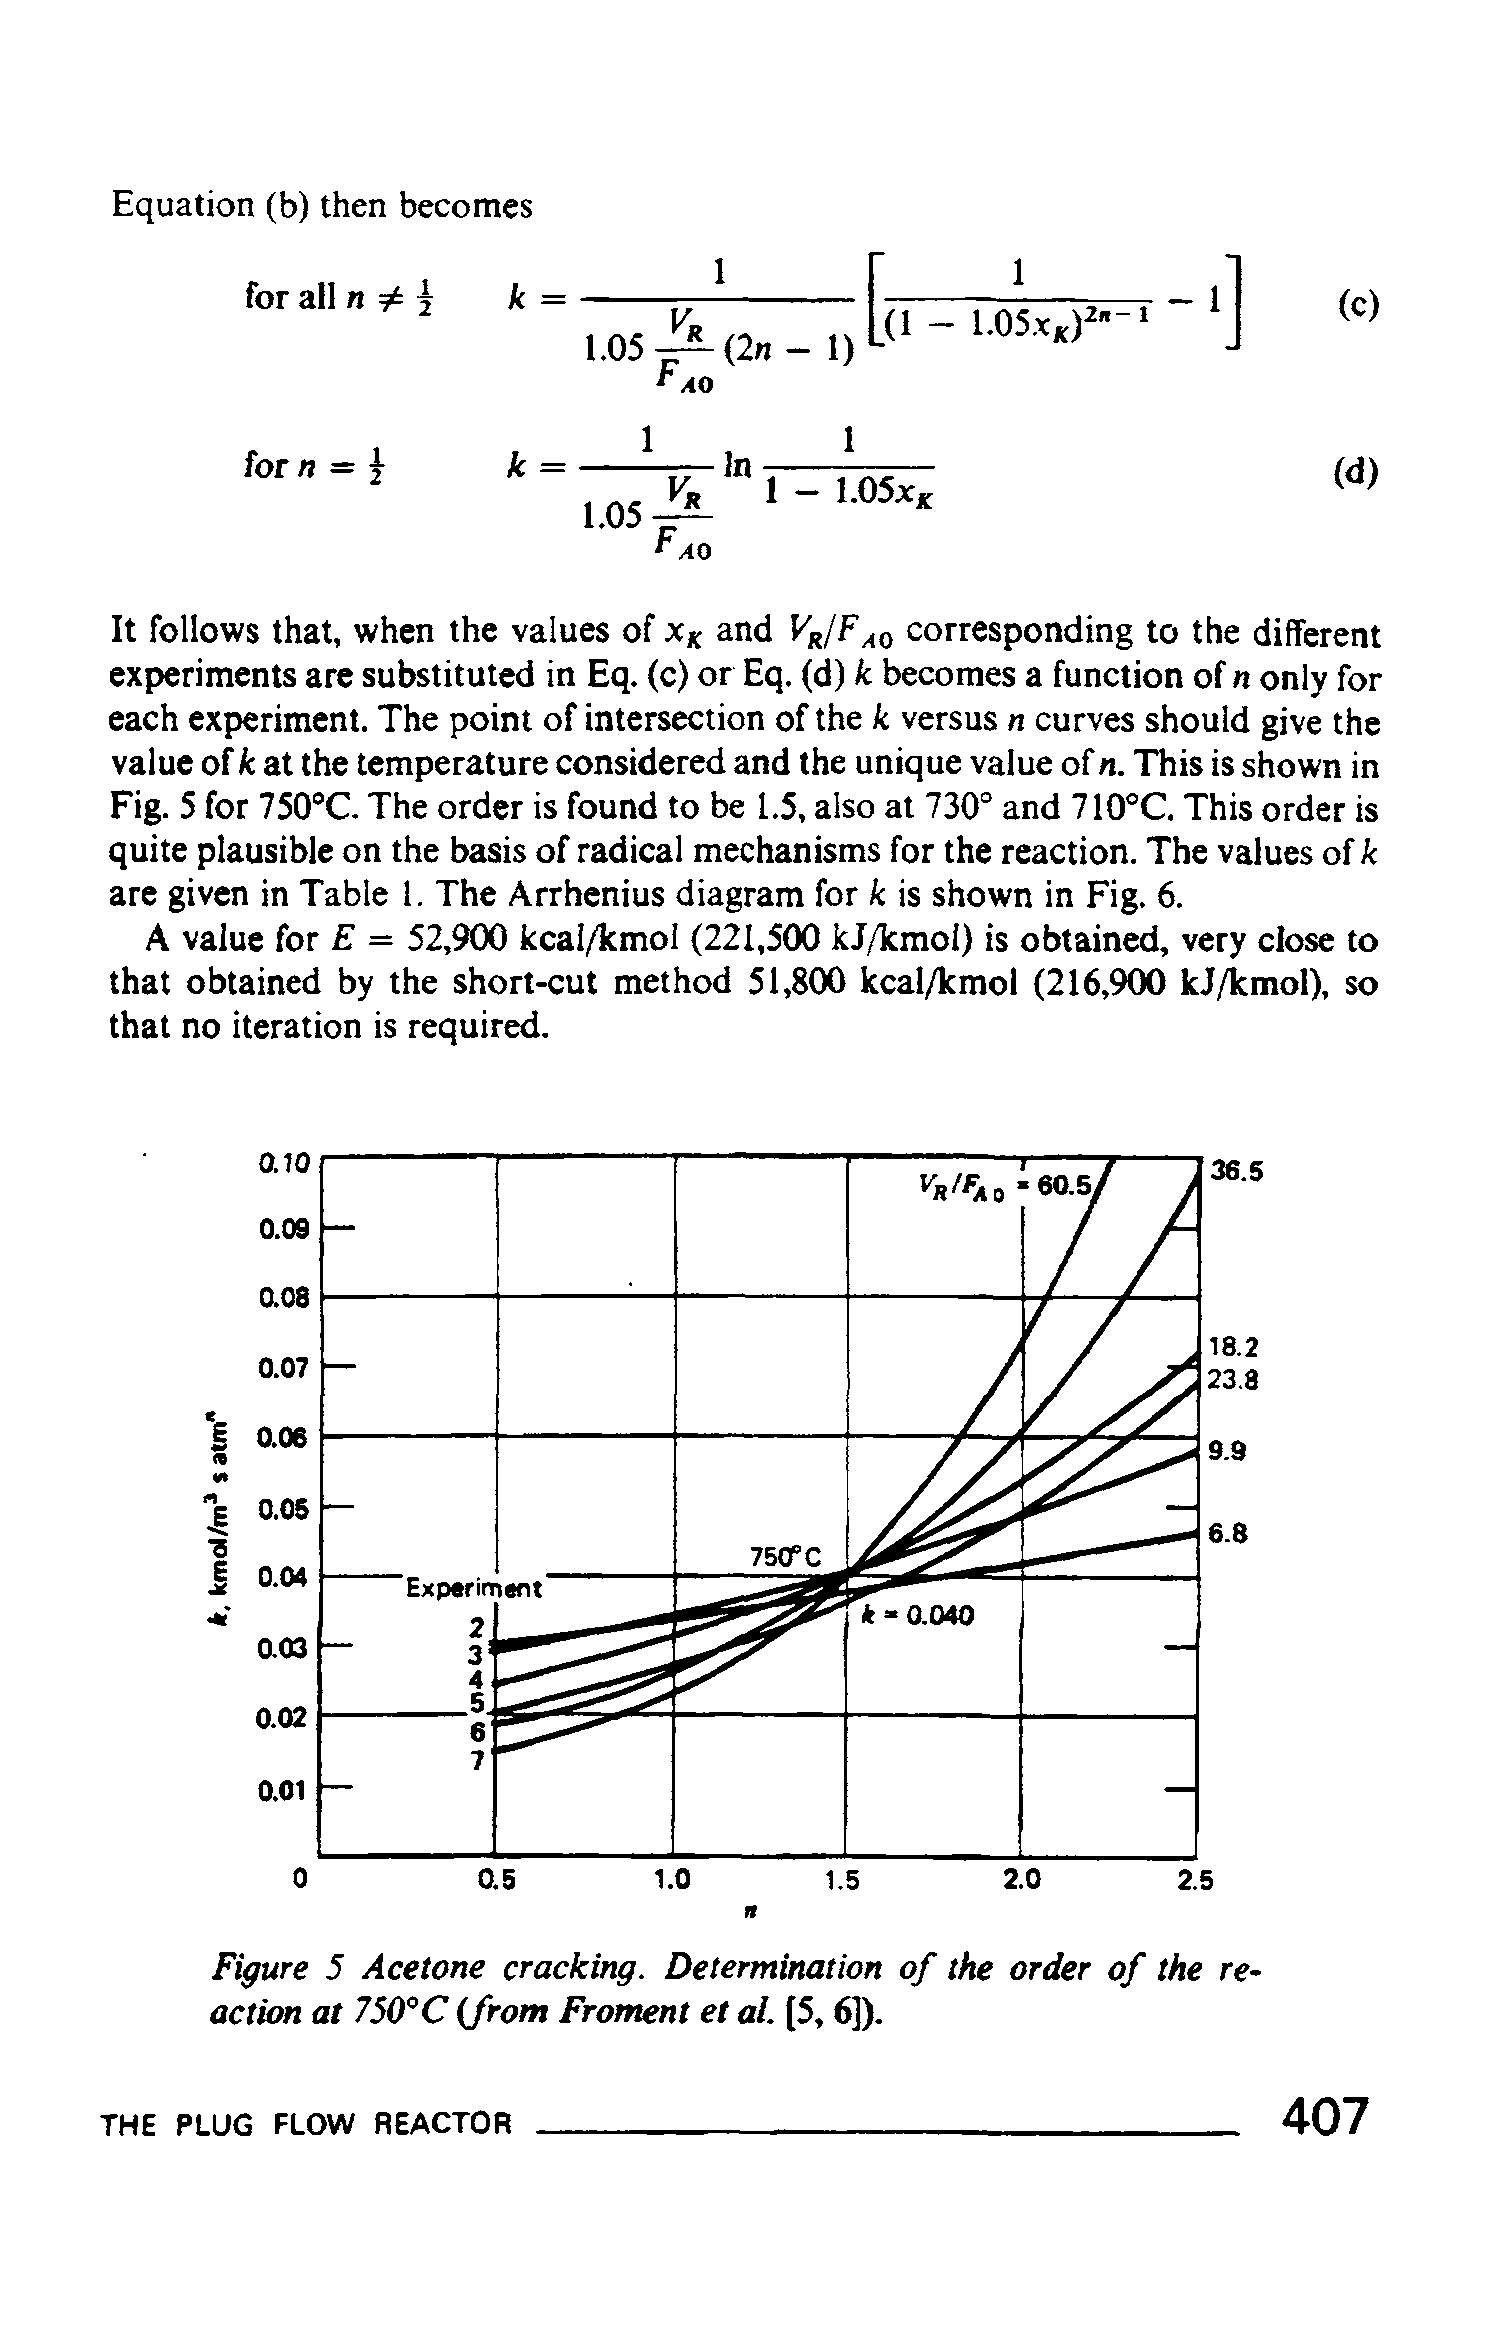 Figure 5 Acetone cracking. Determination of the order of the reaction at 750°C (from Froment et al. (5,6]).